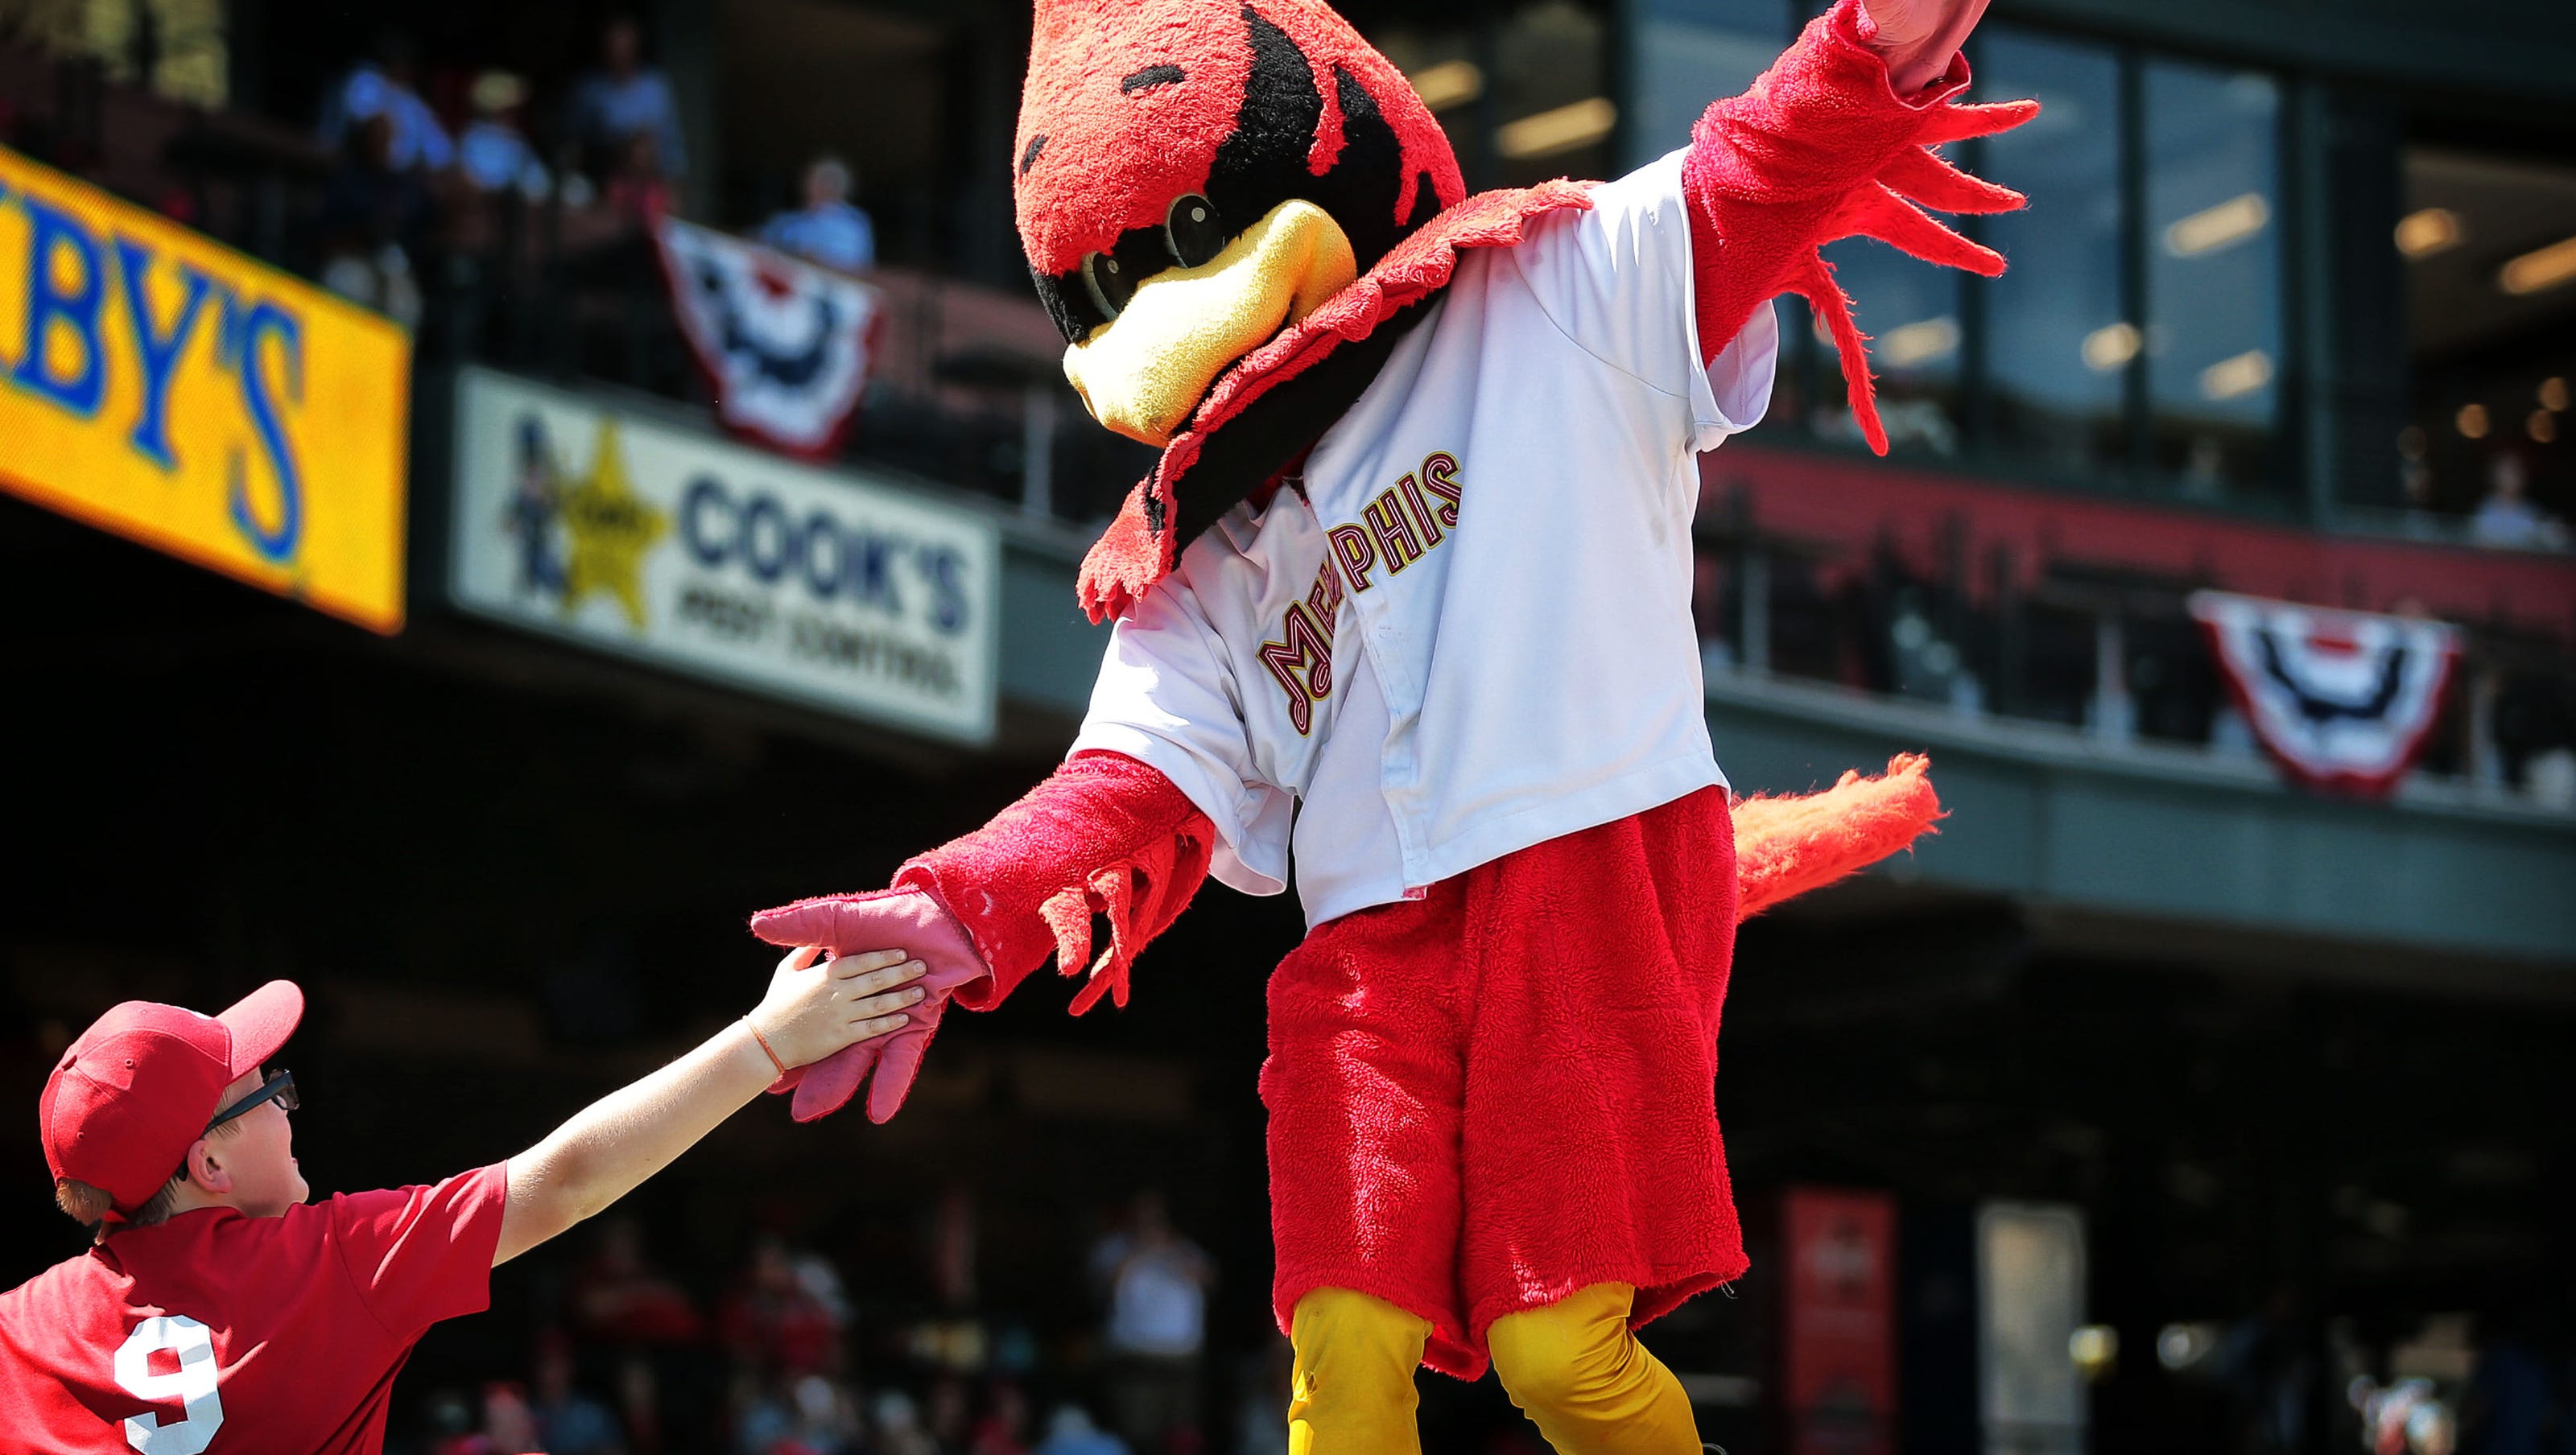 Memphis Redbirds Opening Day is finally here